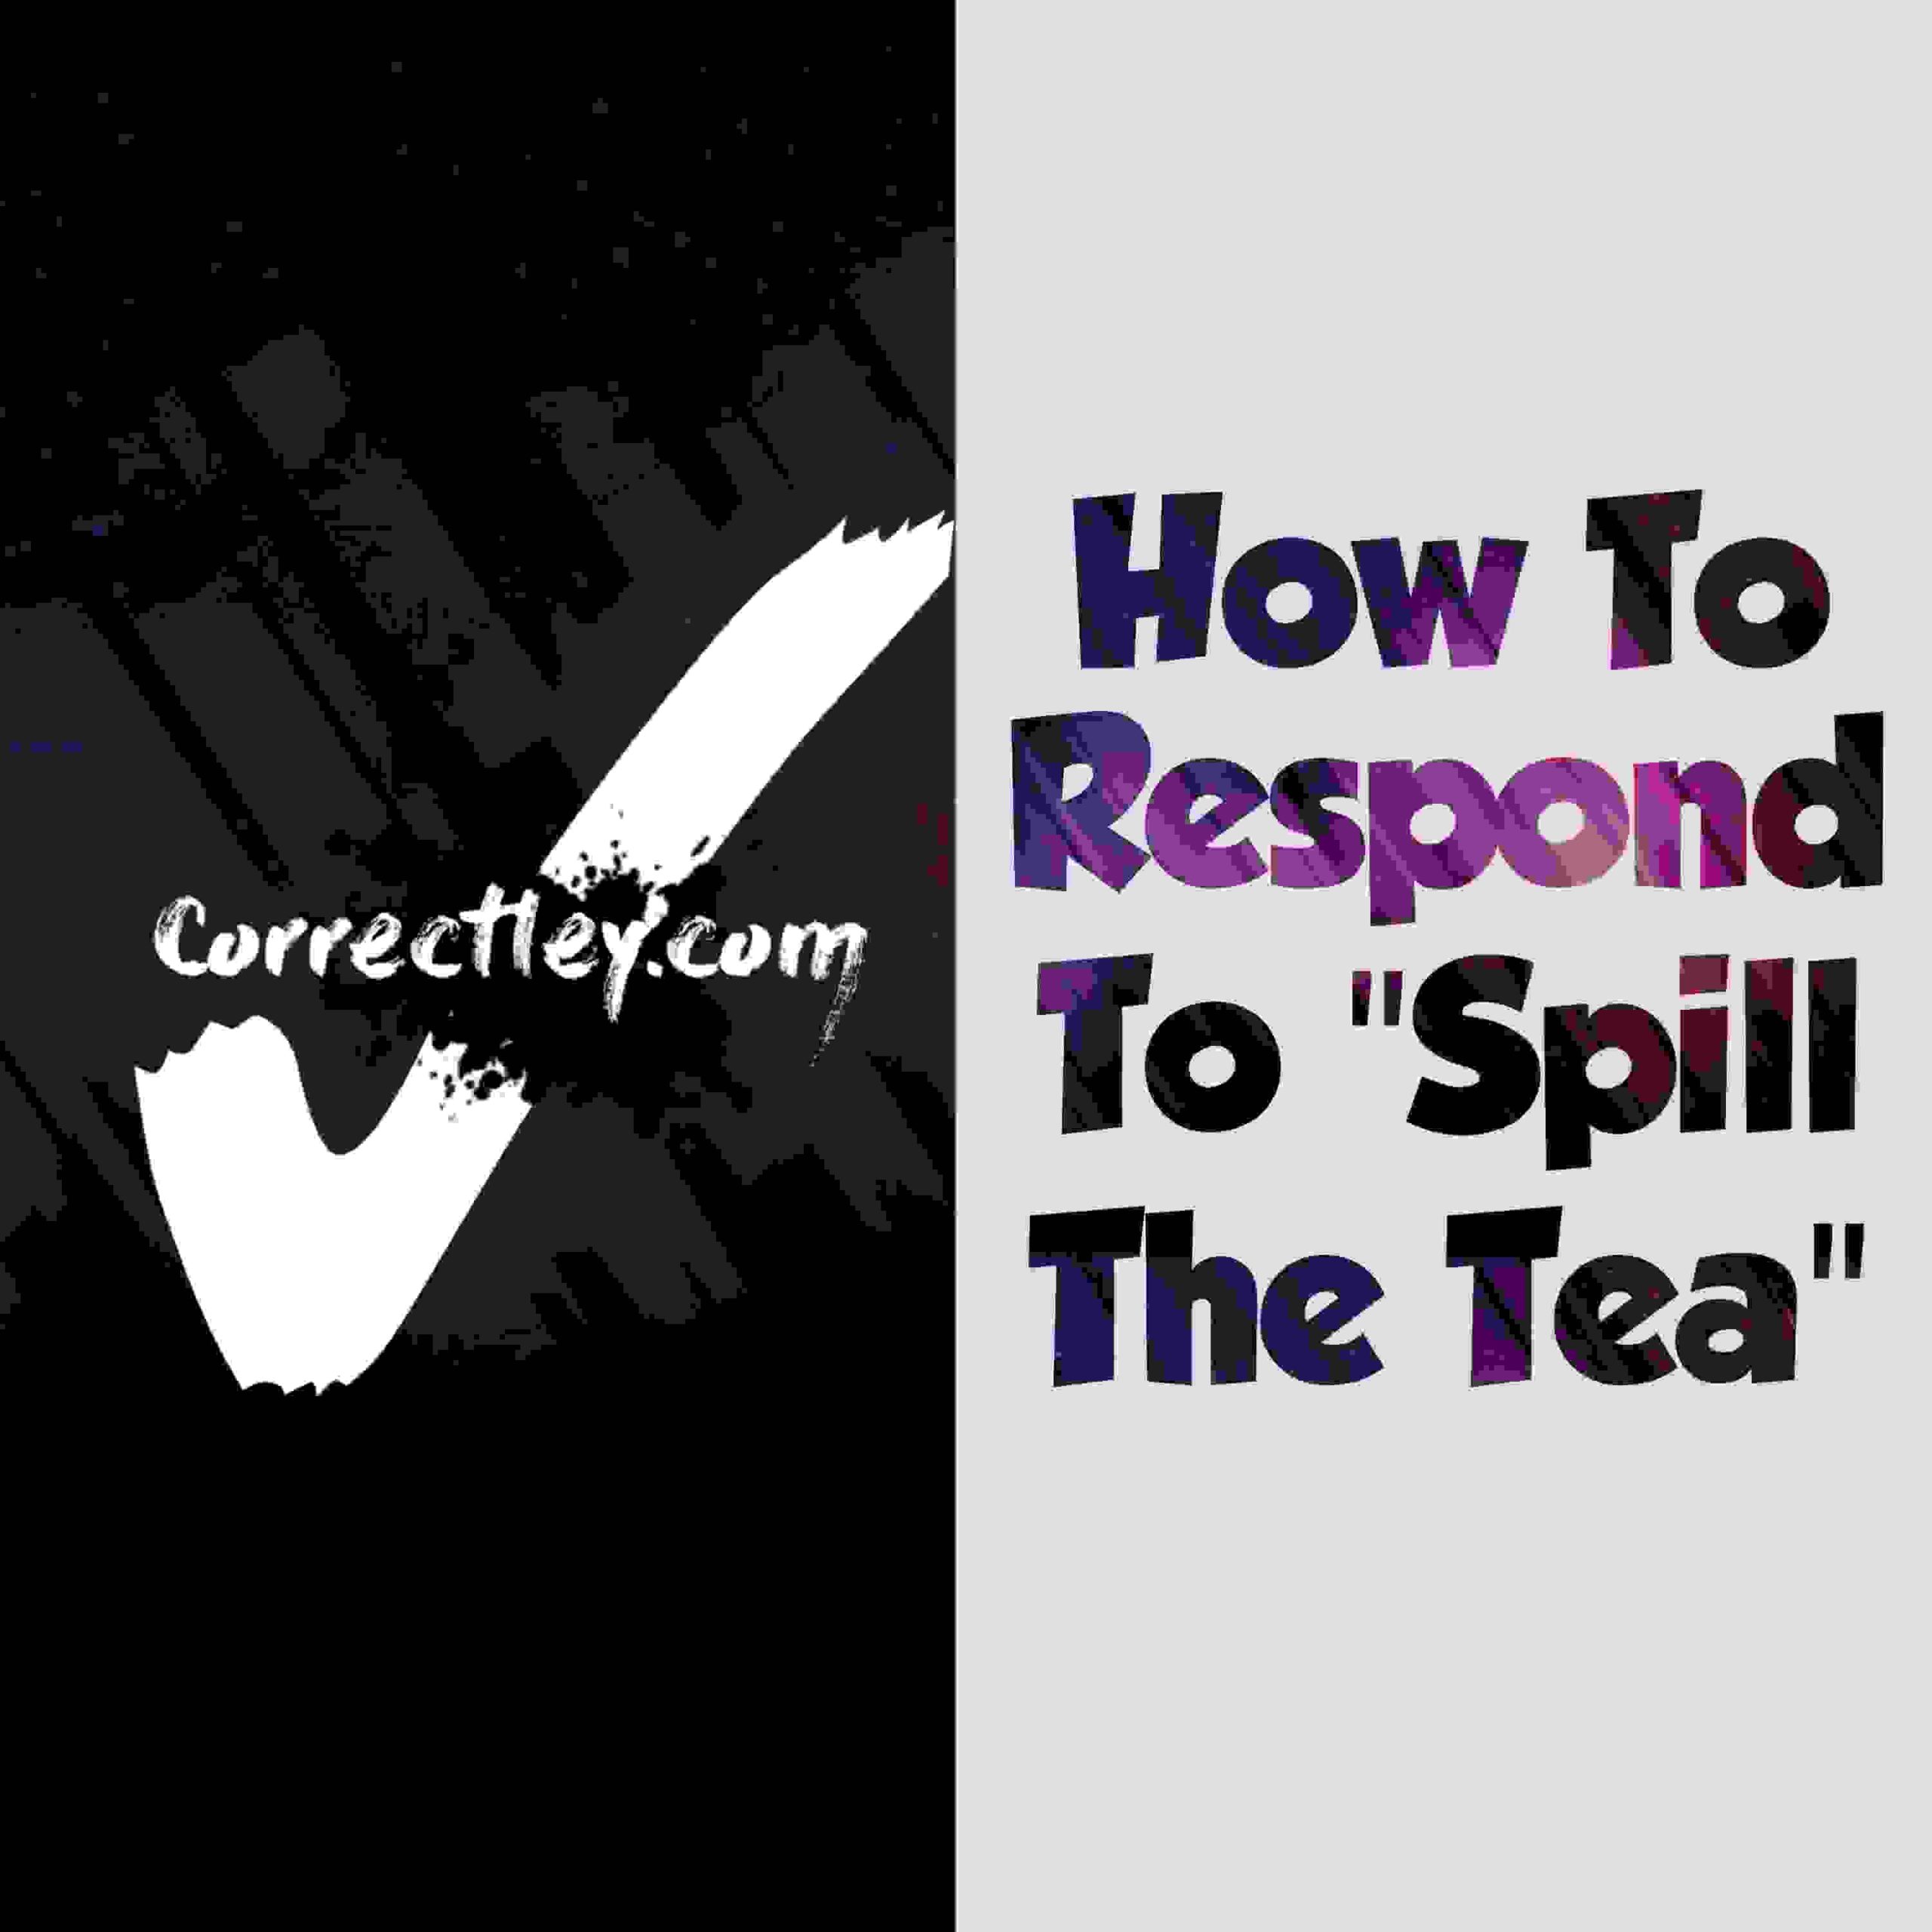 20 Best Responses to "Spill The Tea"